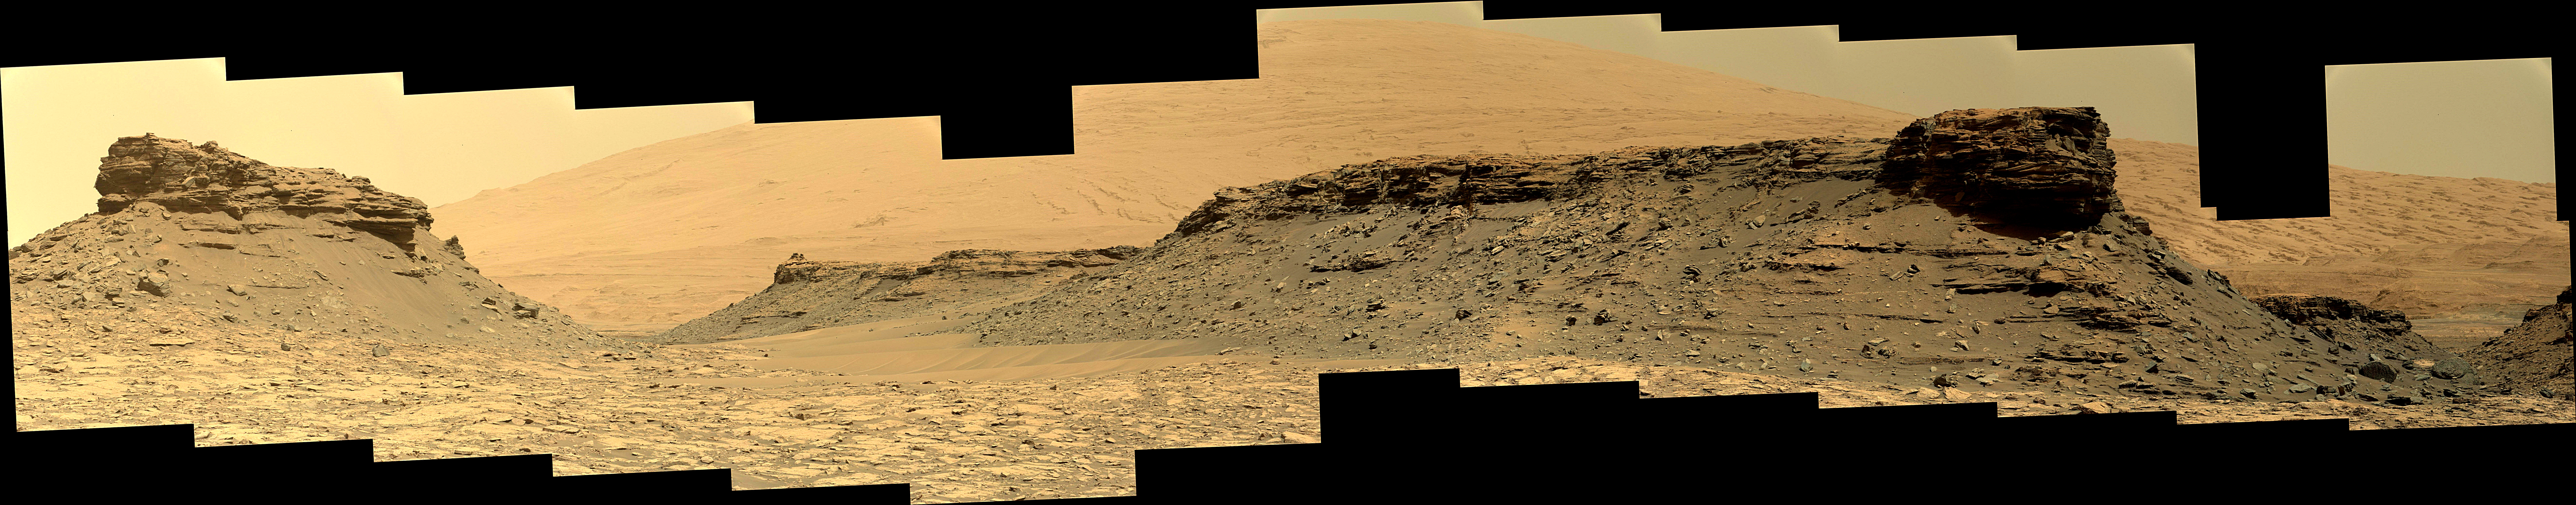 panoramic curiosity rover view 2e - sol 1434 - was life on mars